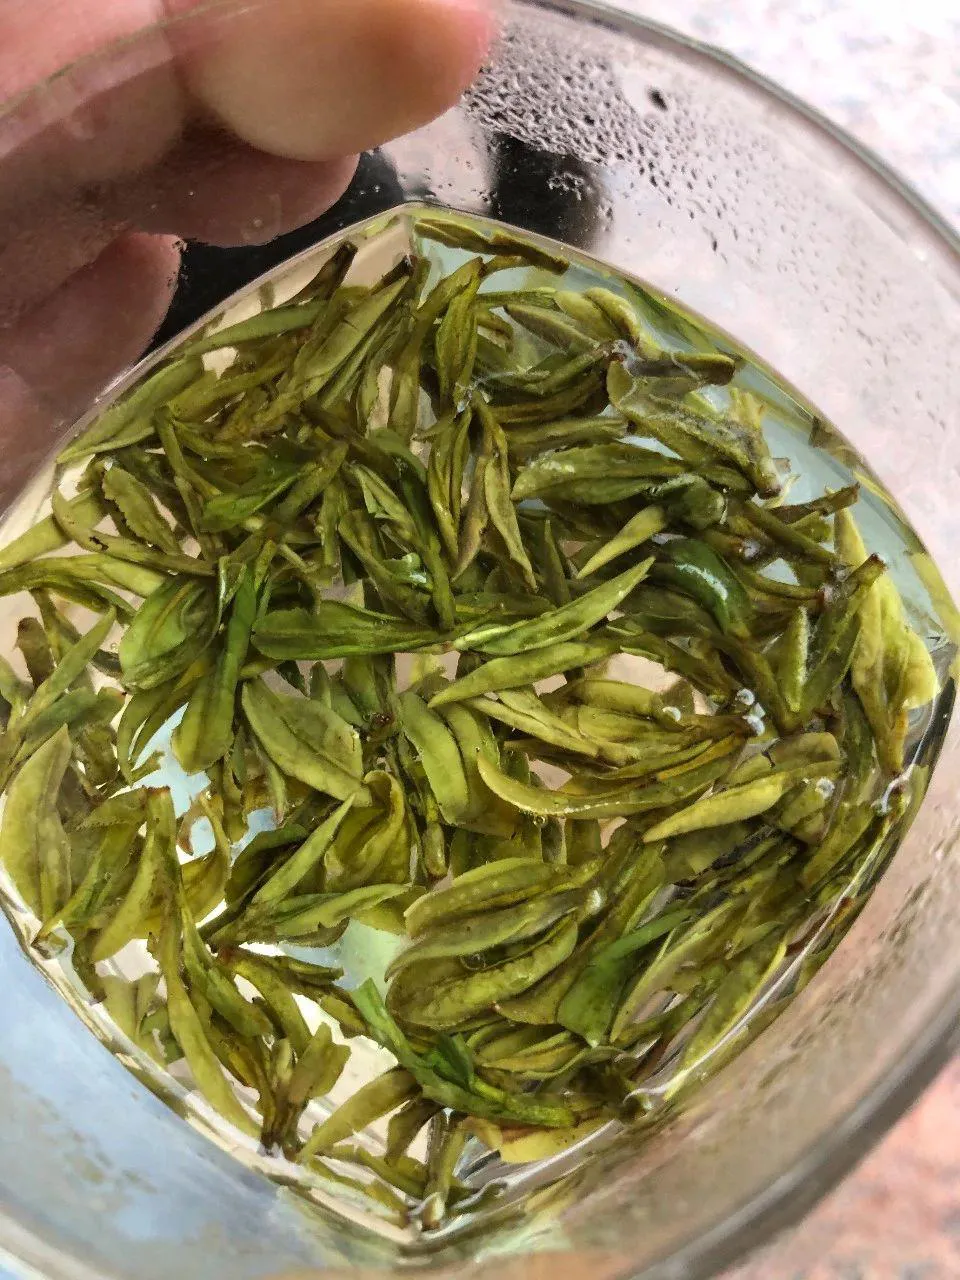 2023's first-picked Shifeng Longjing tea buds are thin and small due to low temperatures